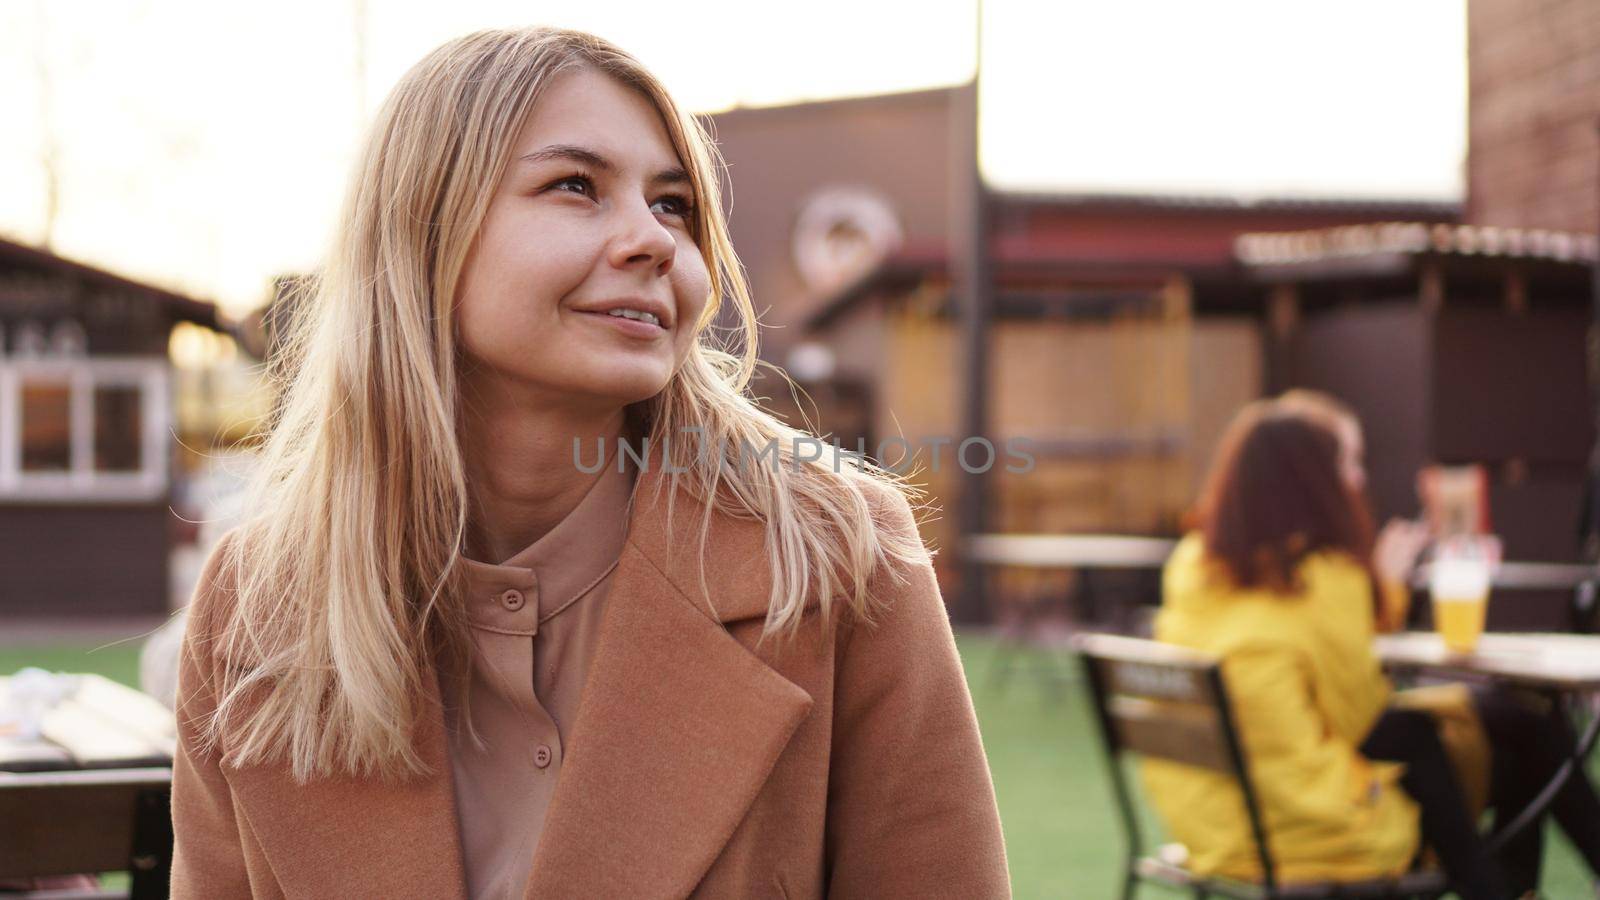 Portrait of a young woman in the city. City food court with street food. Portrait of a smiling blonde. Lifestyle photo